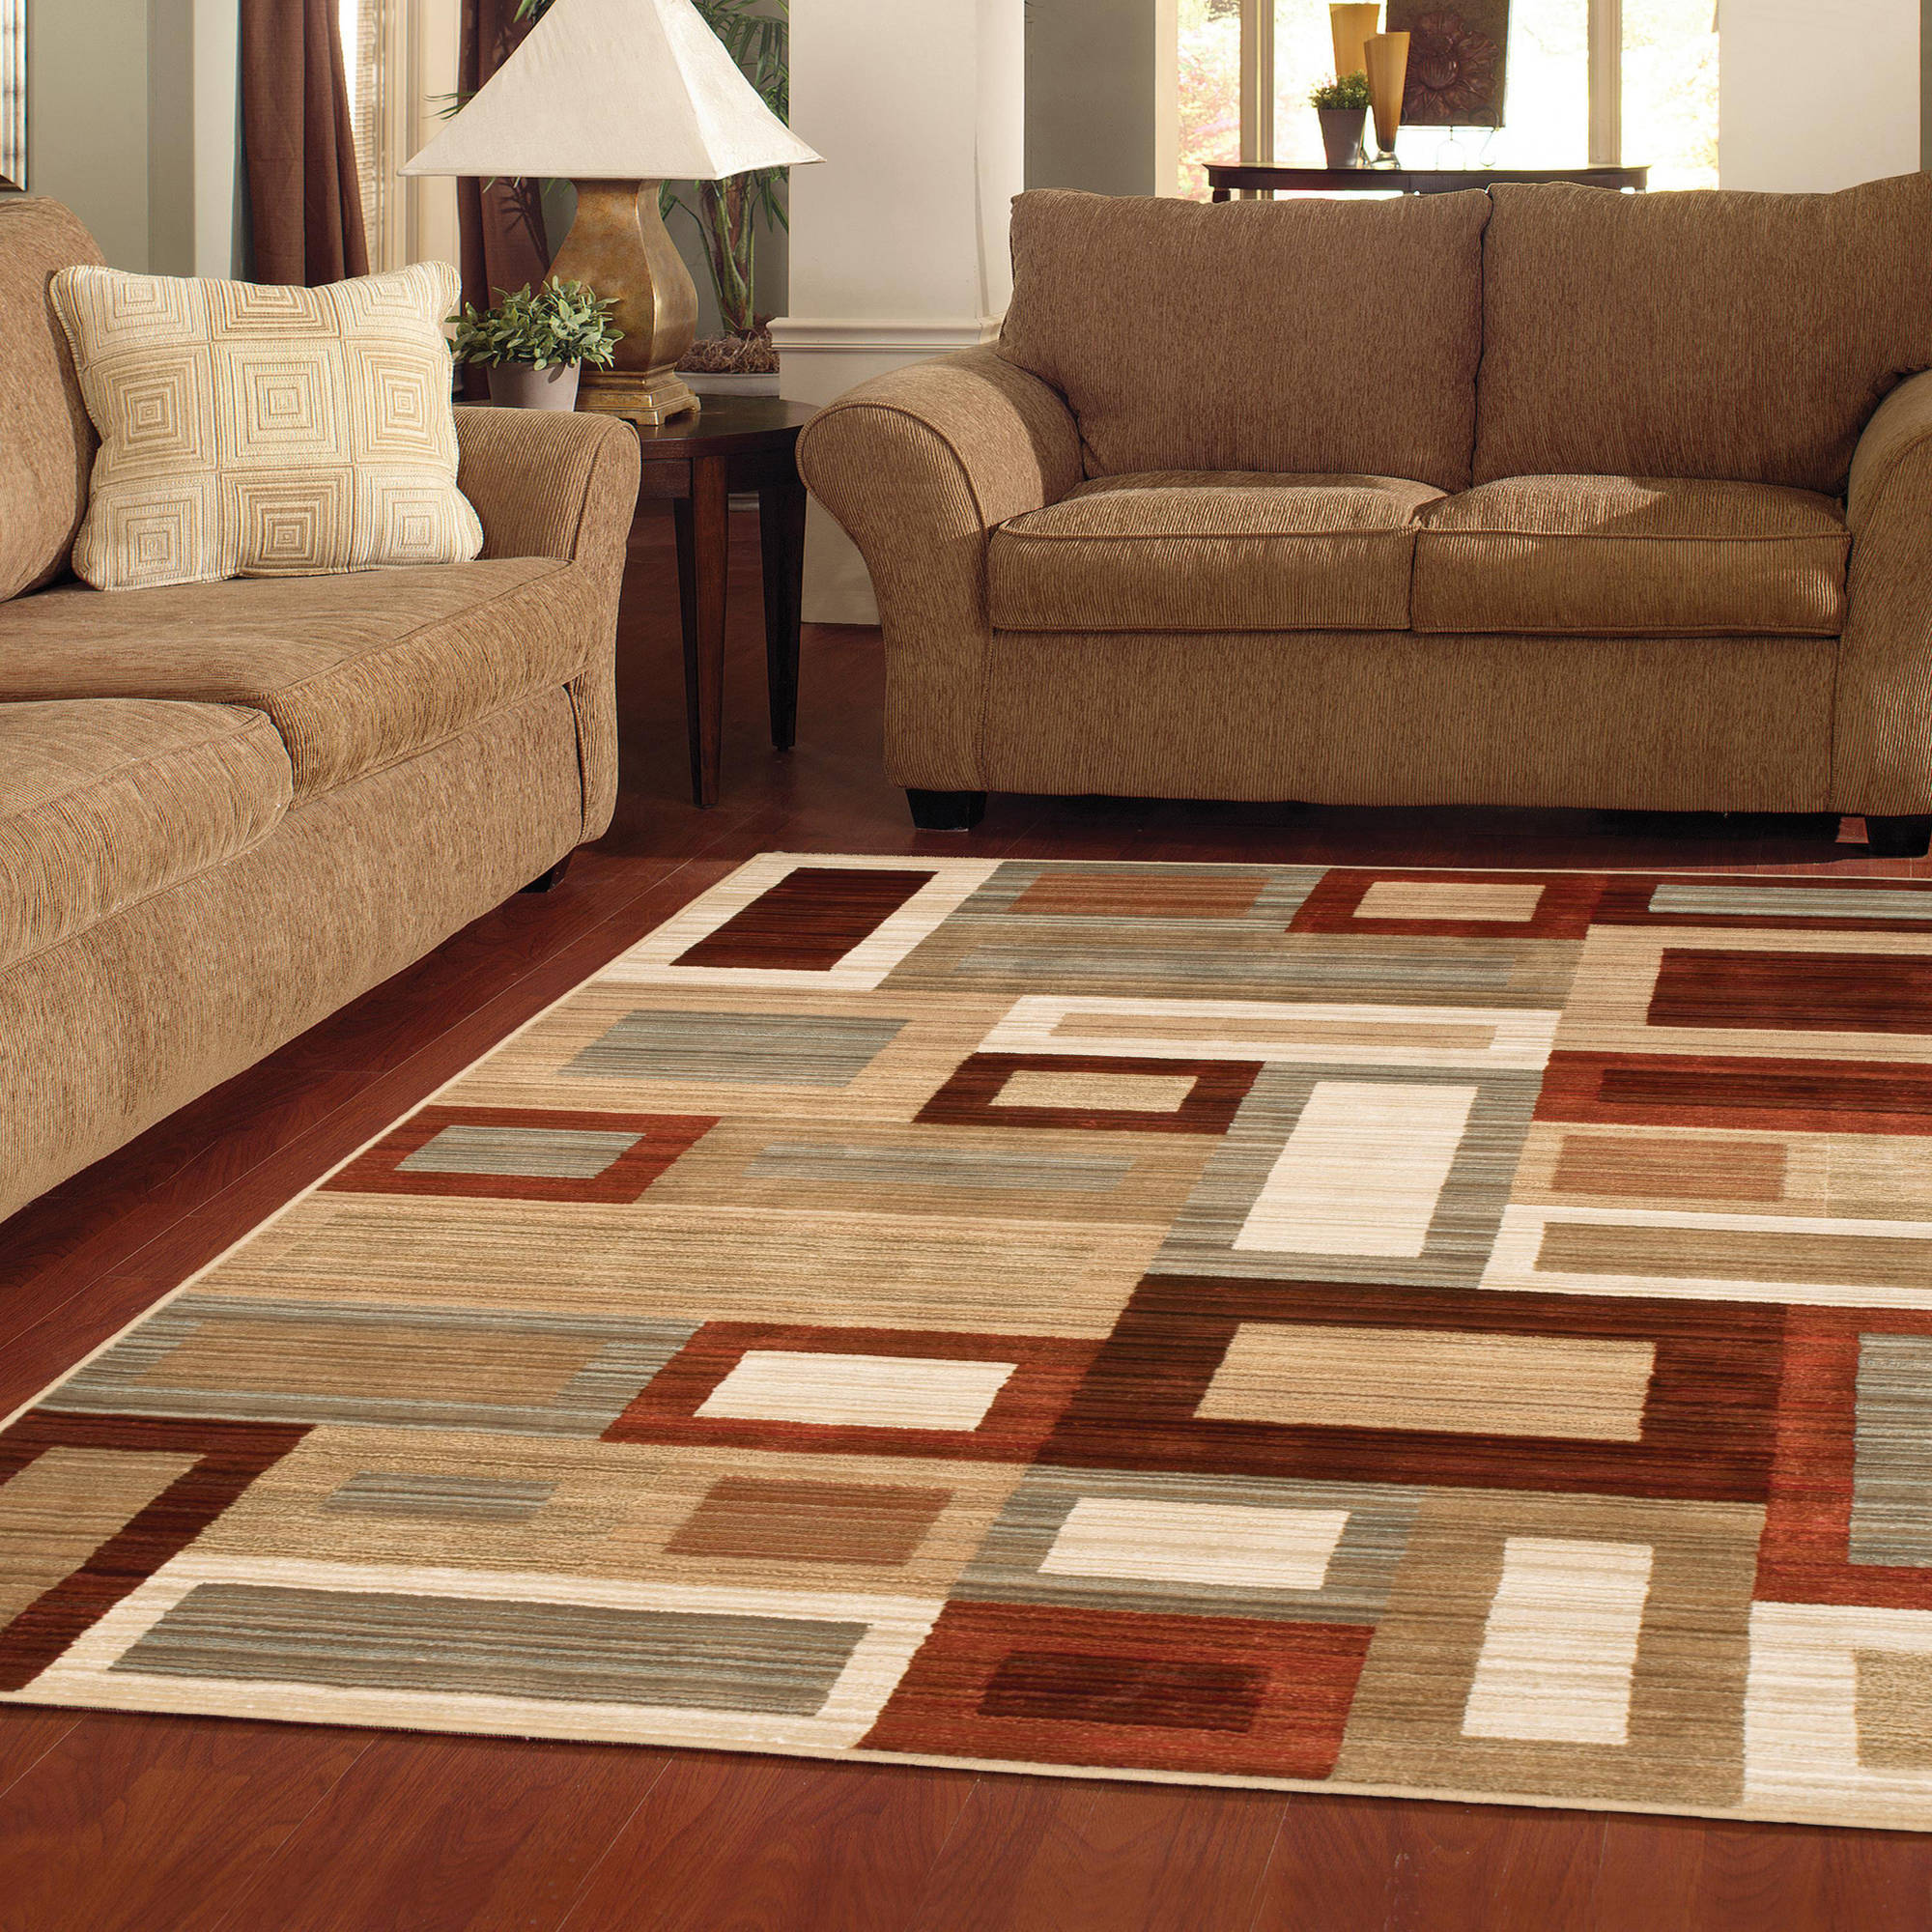 home rugs better homes and gardens franklin squares area rug or runner - walmart.com ITOEPQA